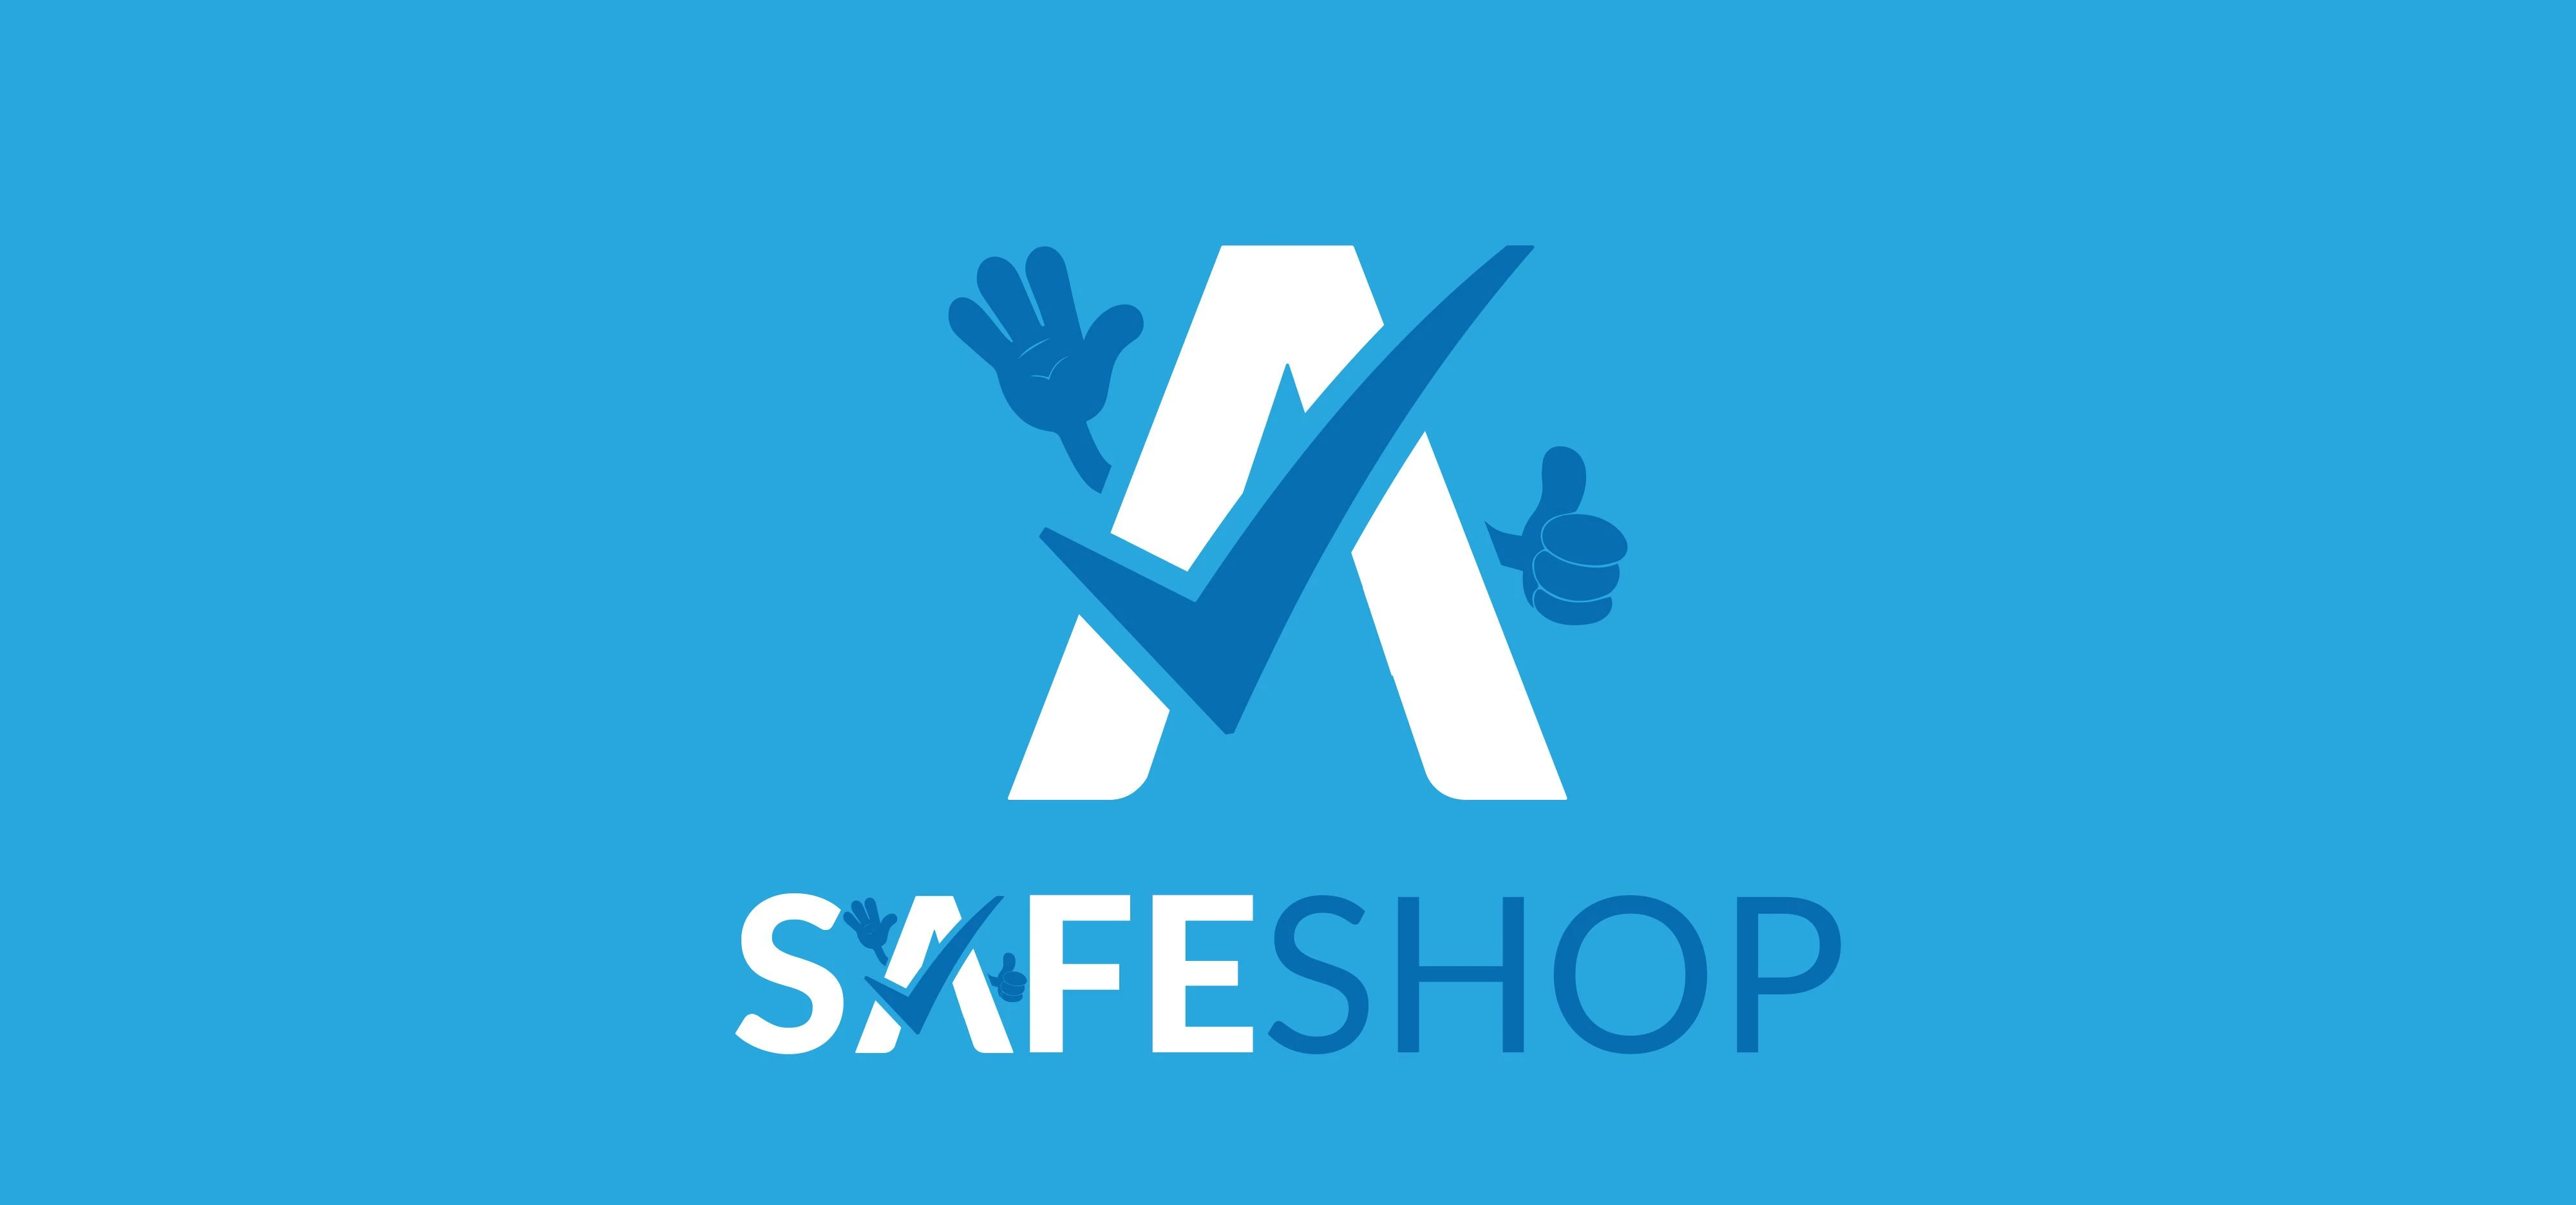 SafeShop mobile app makes it easy for small shops and businesses to comply with health & safety laws